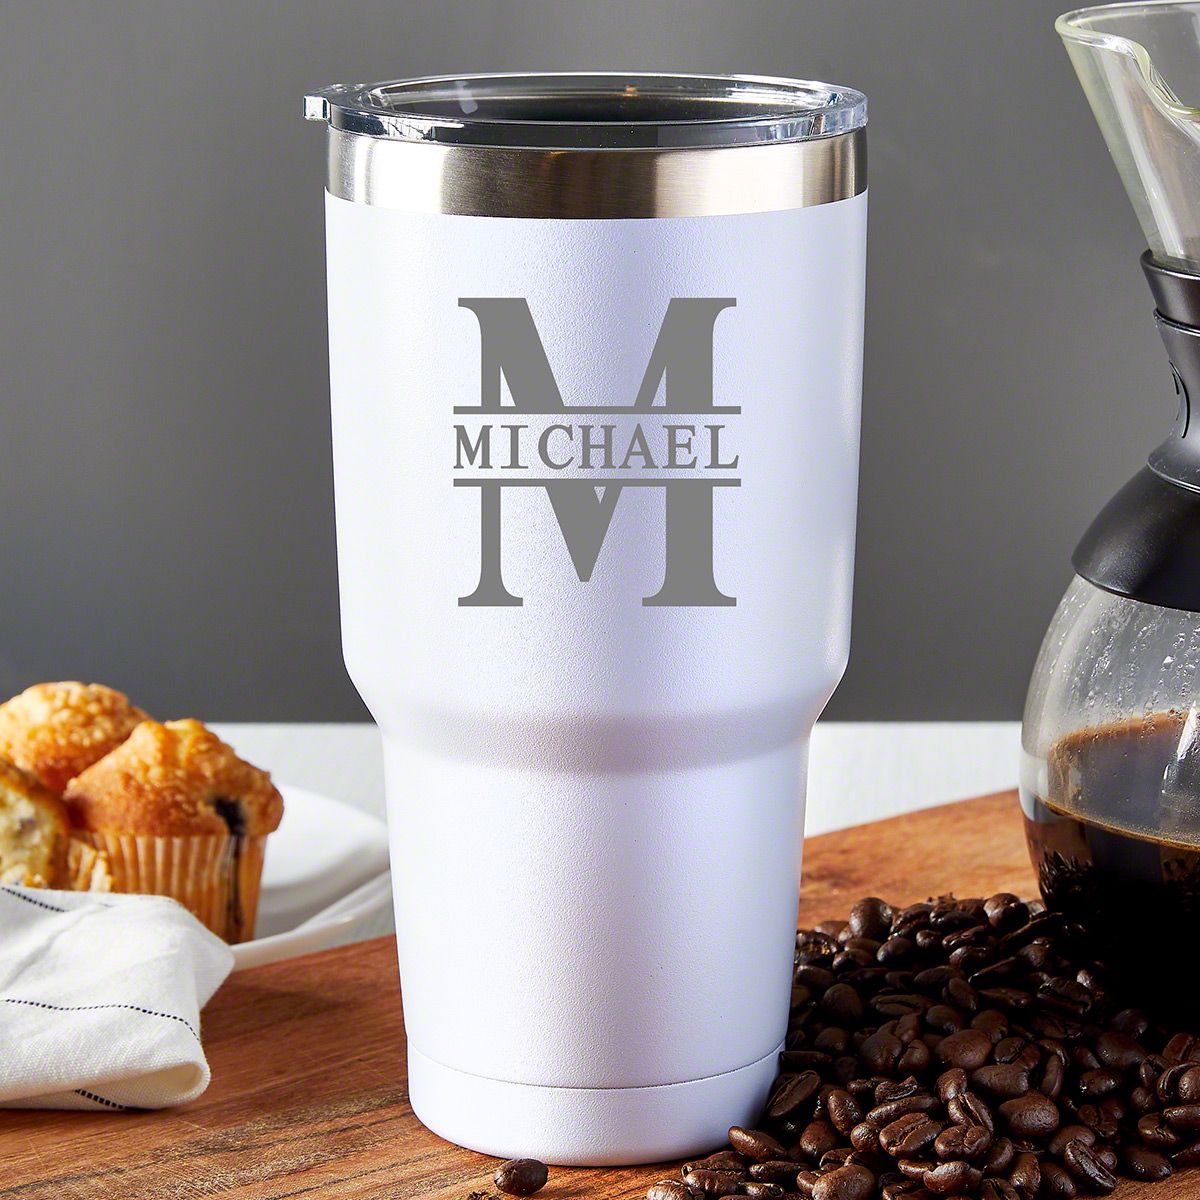 Engraved Gifts for Doctors - 5pc Medical Arts Coffee Tumbler Luxury Box Set